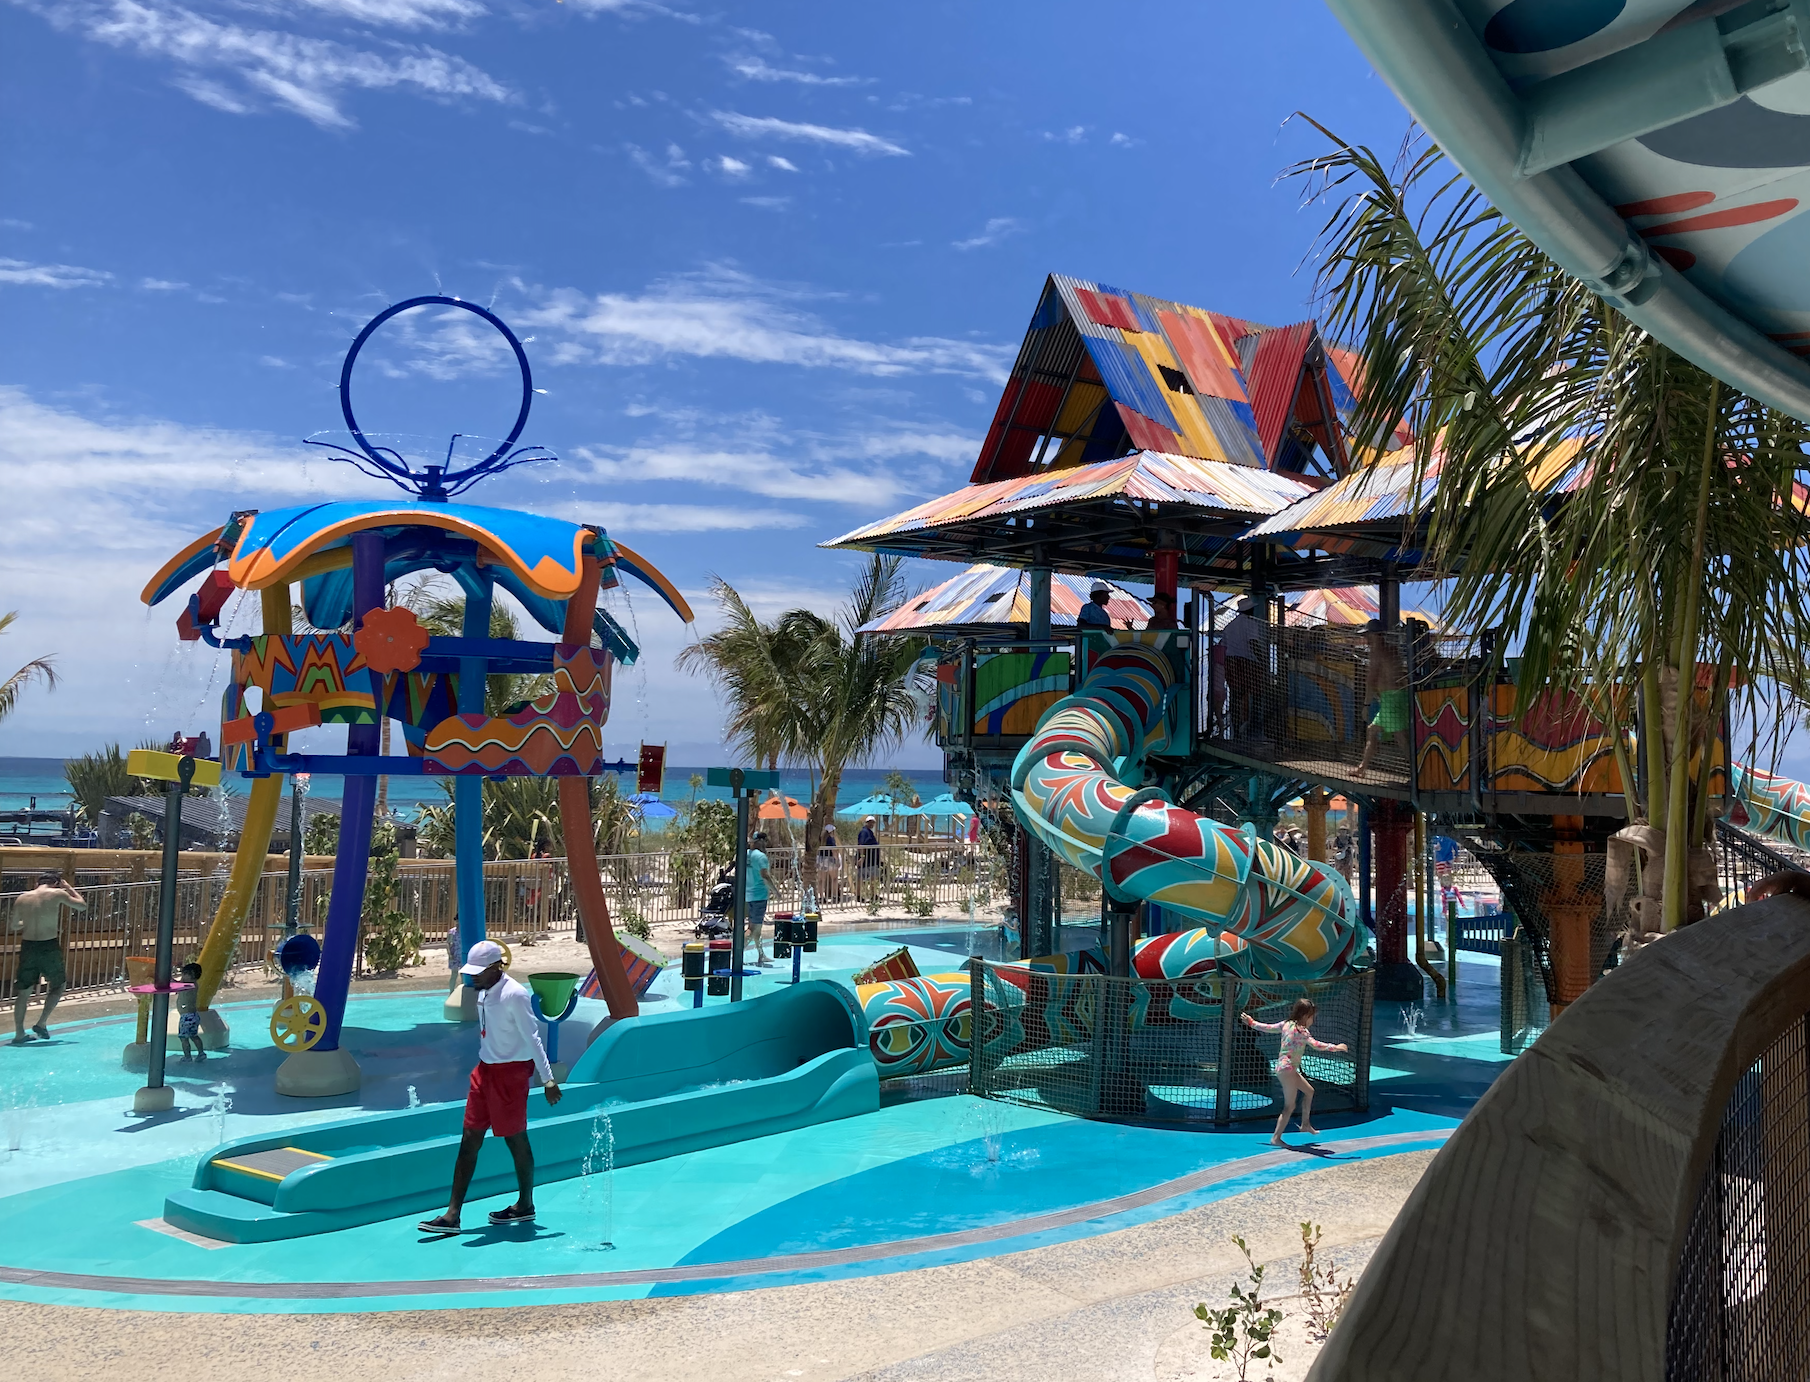 People enjoying a vibrant water play area with slides and colorful structures at a beachside waterpark on a sunny day